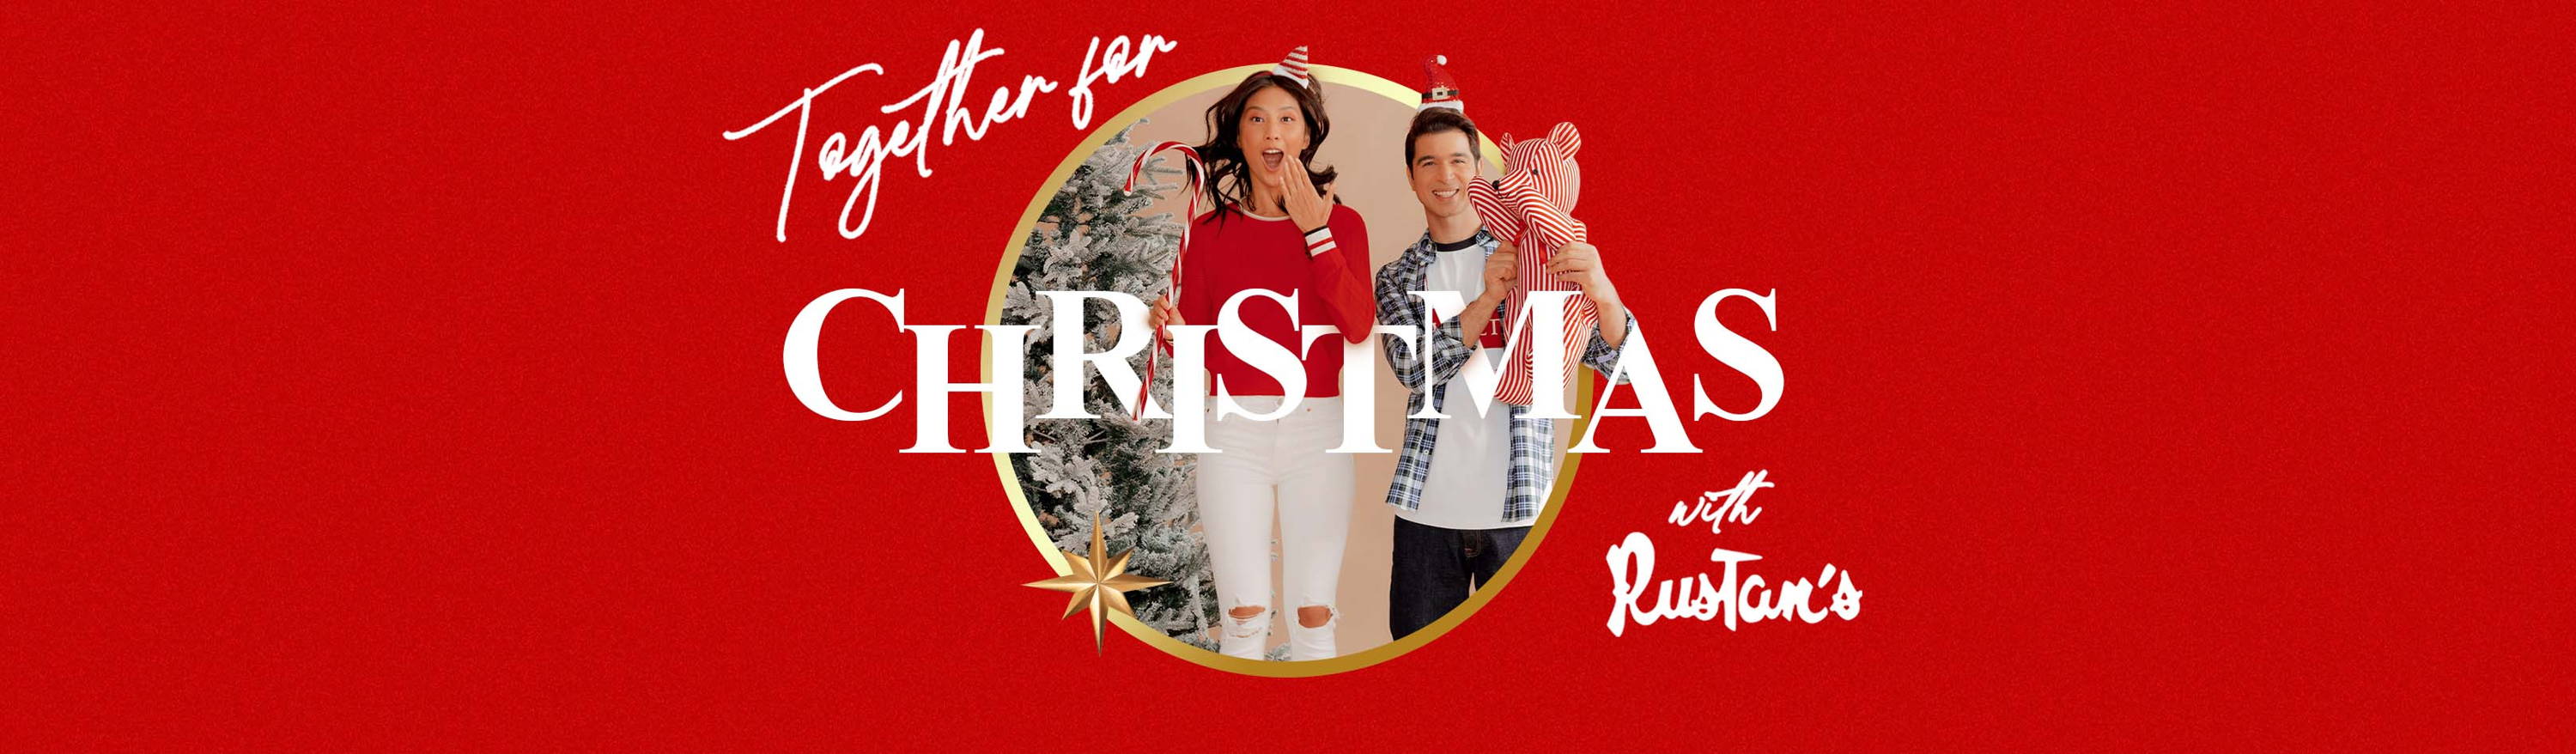 Together for Christmas with Rustan's: Weekend Promos